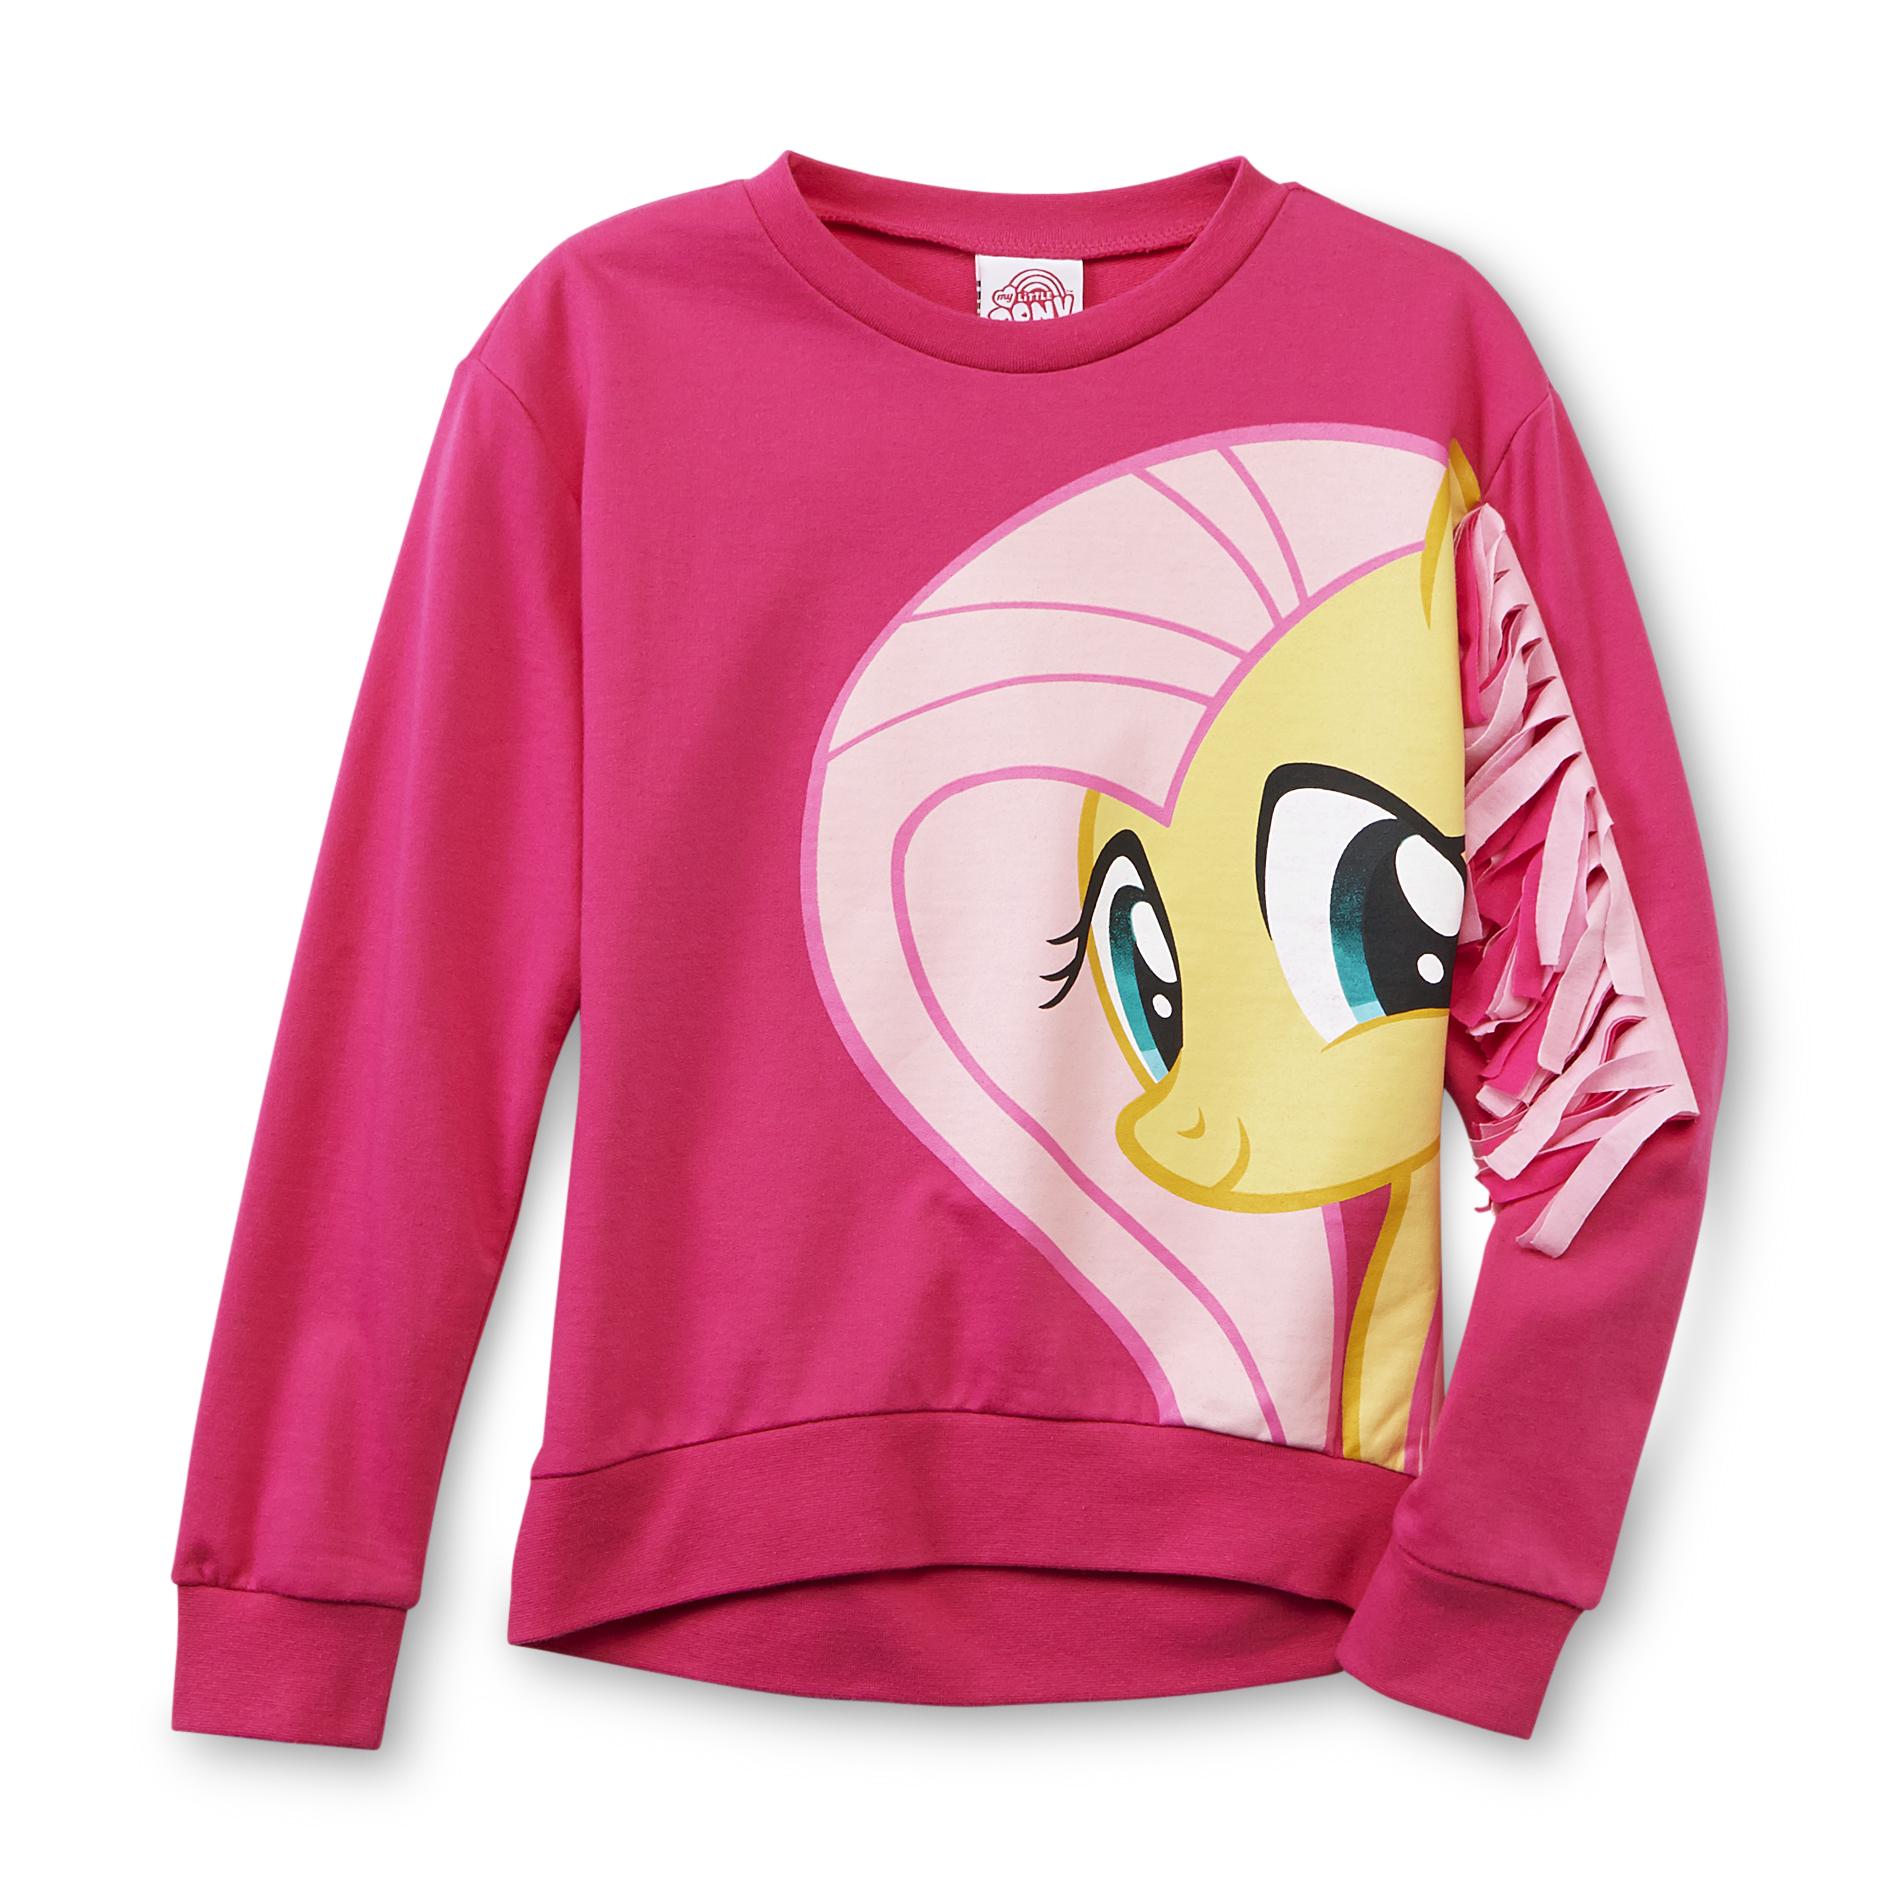 My Little Pony Girl's Graphic Sweater - Fluttershy